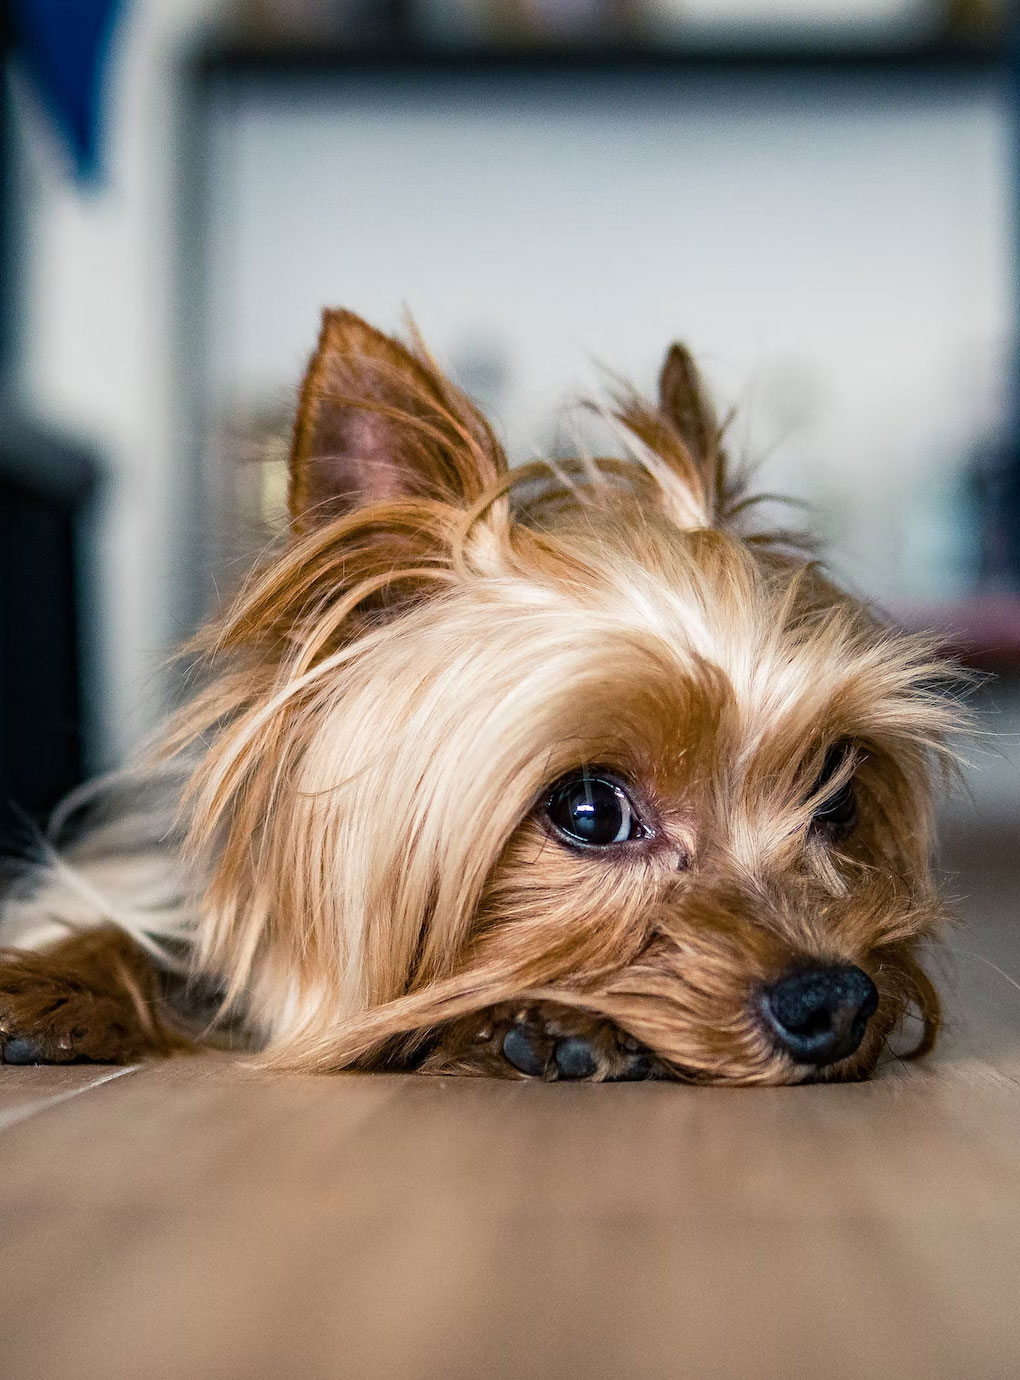 How often should a Yorkie be groomed?